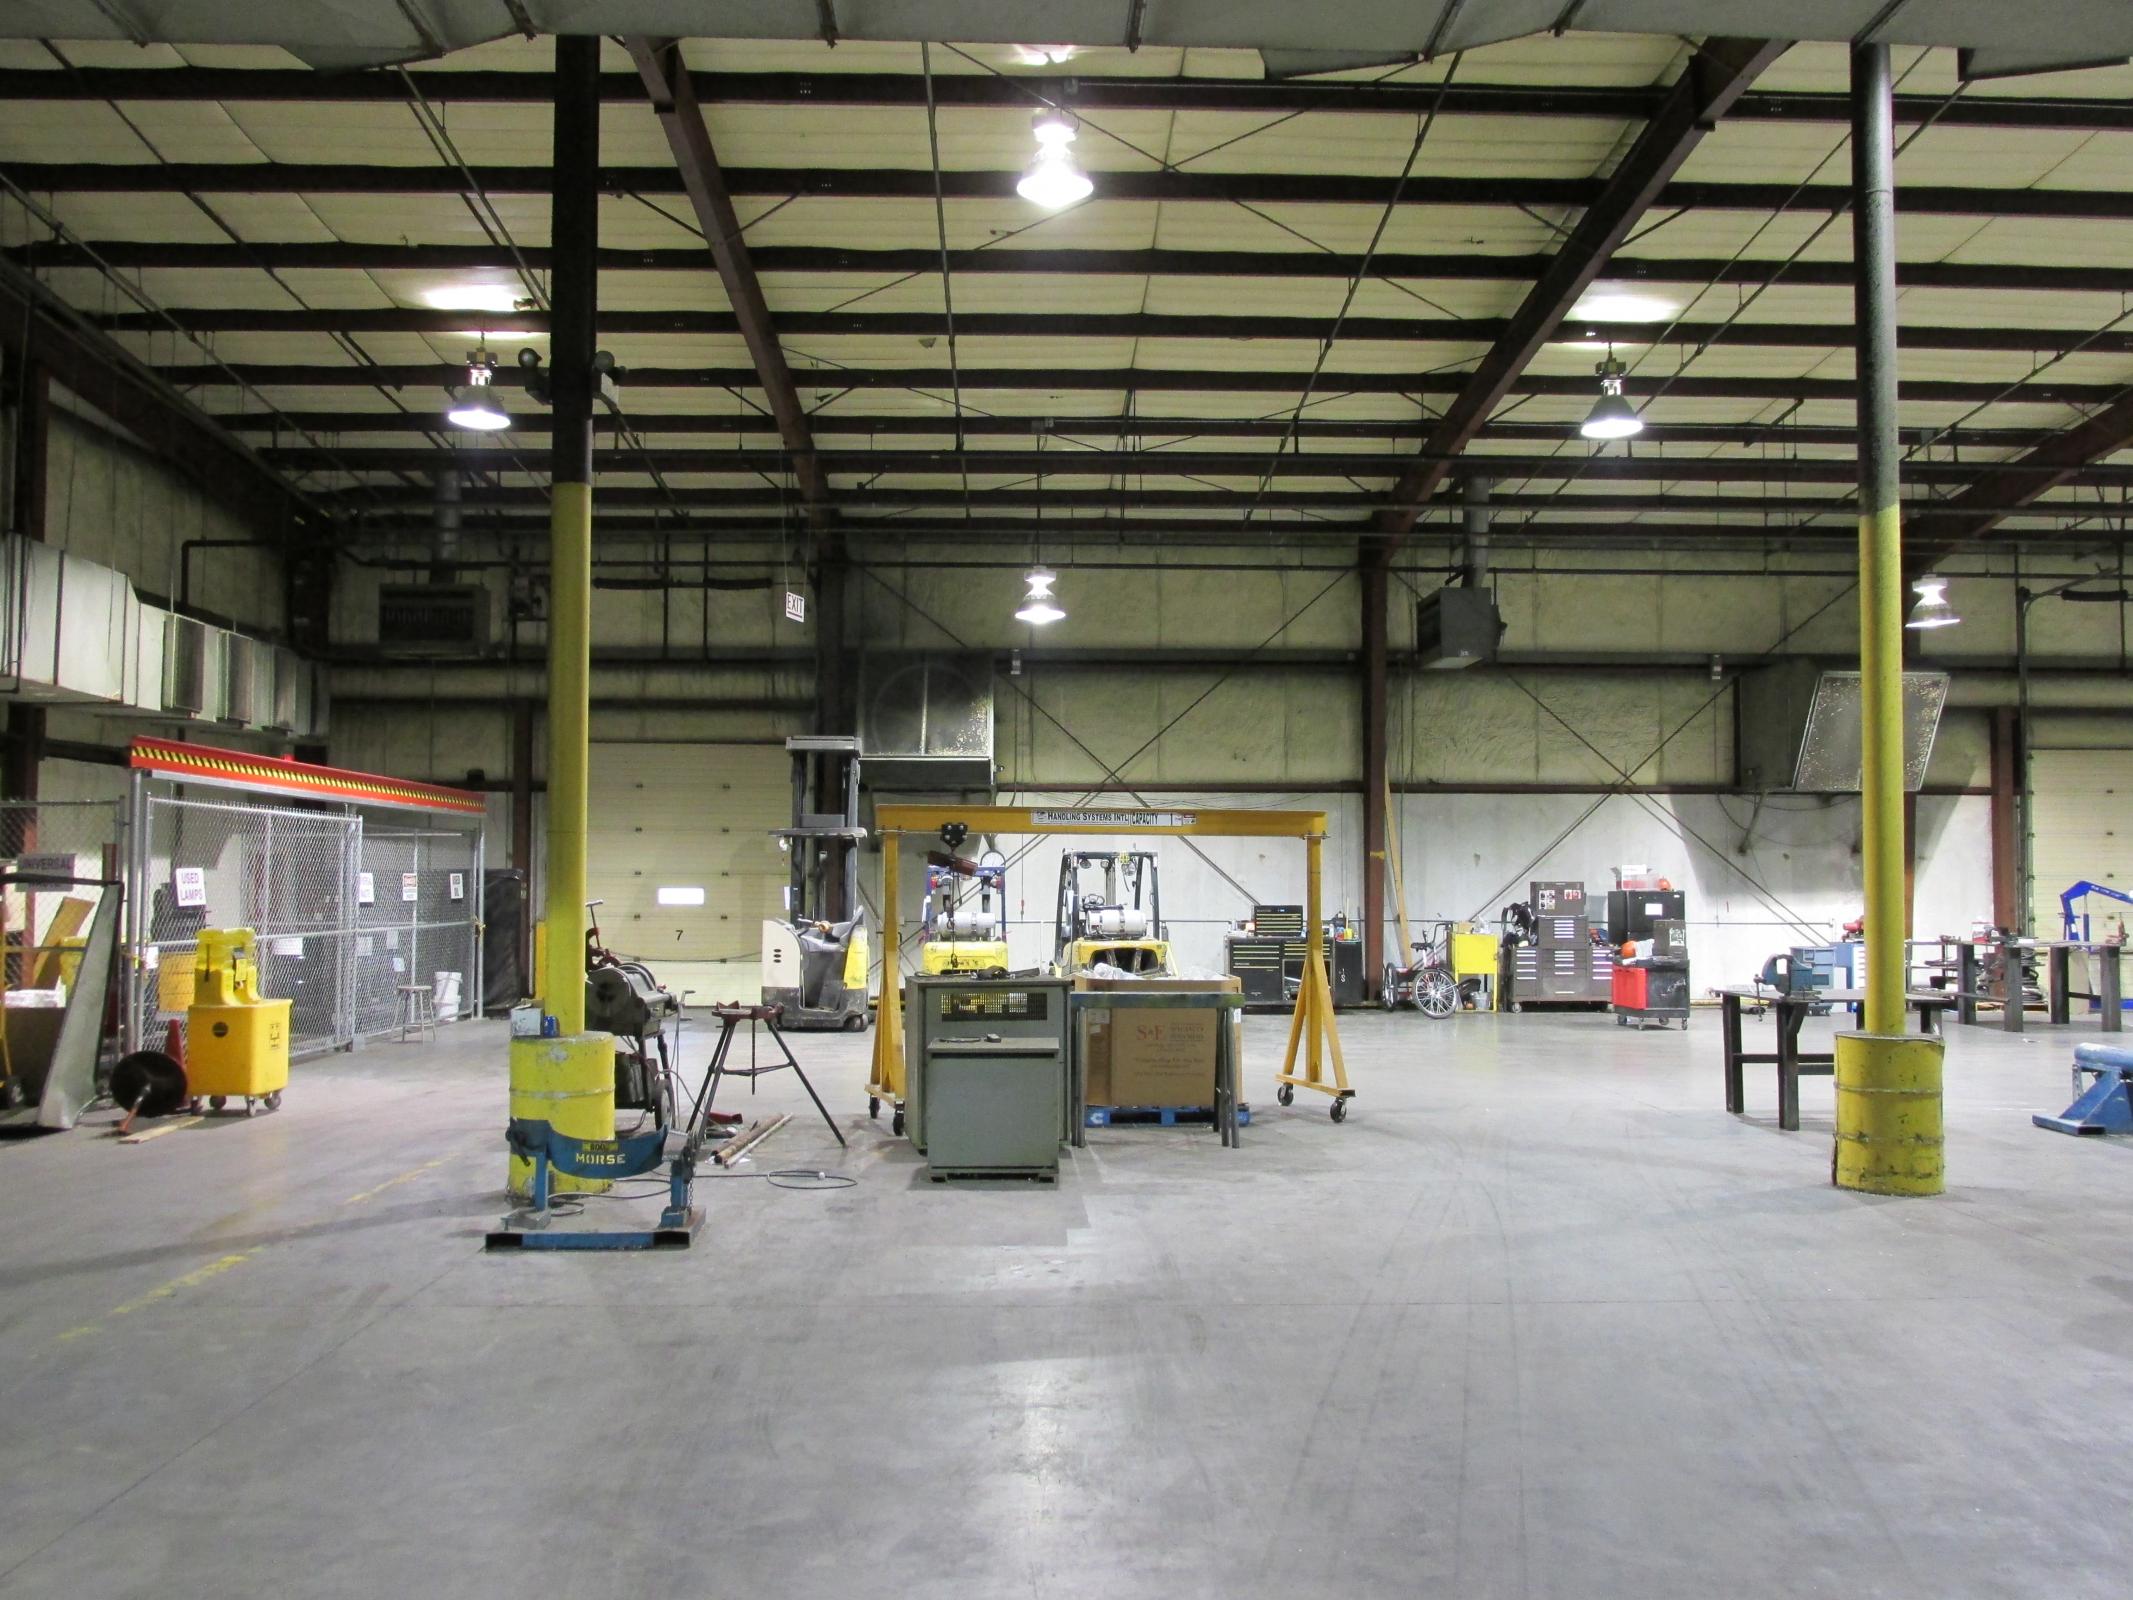 North end of Manufacturing floor